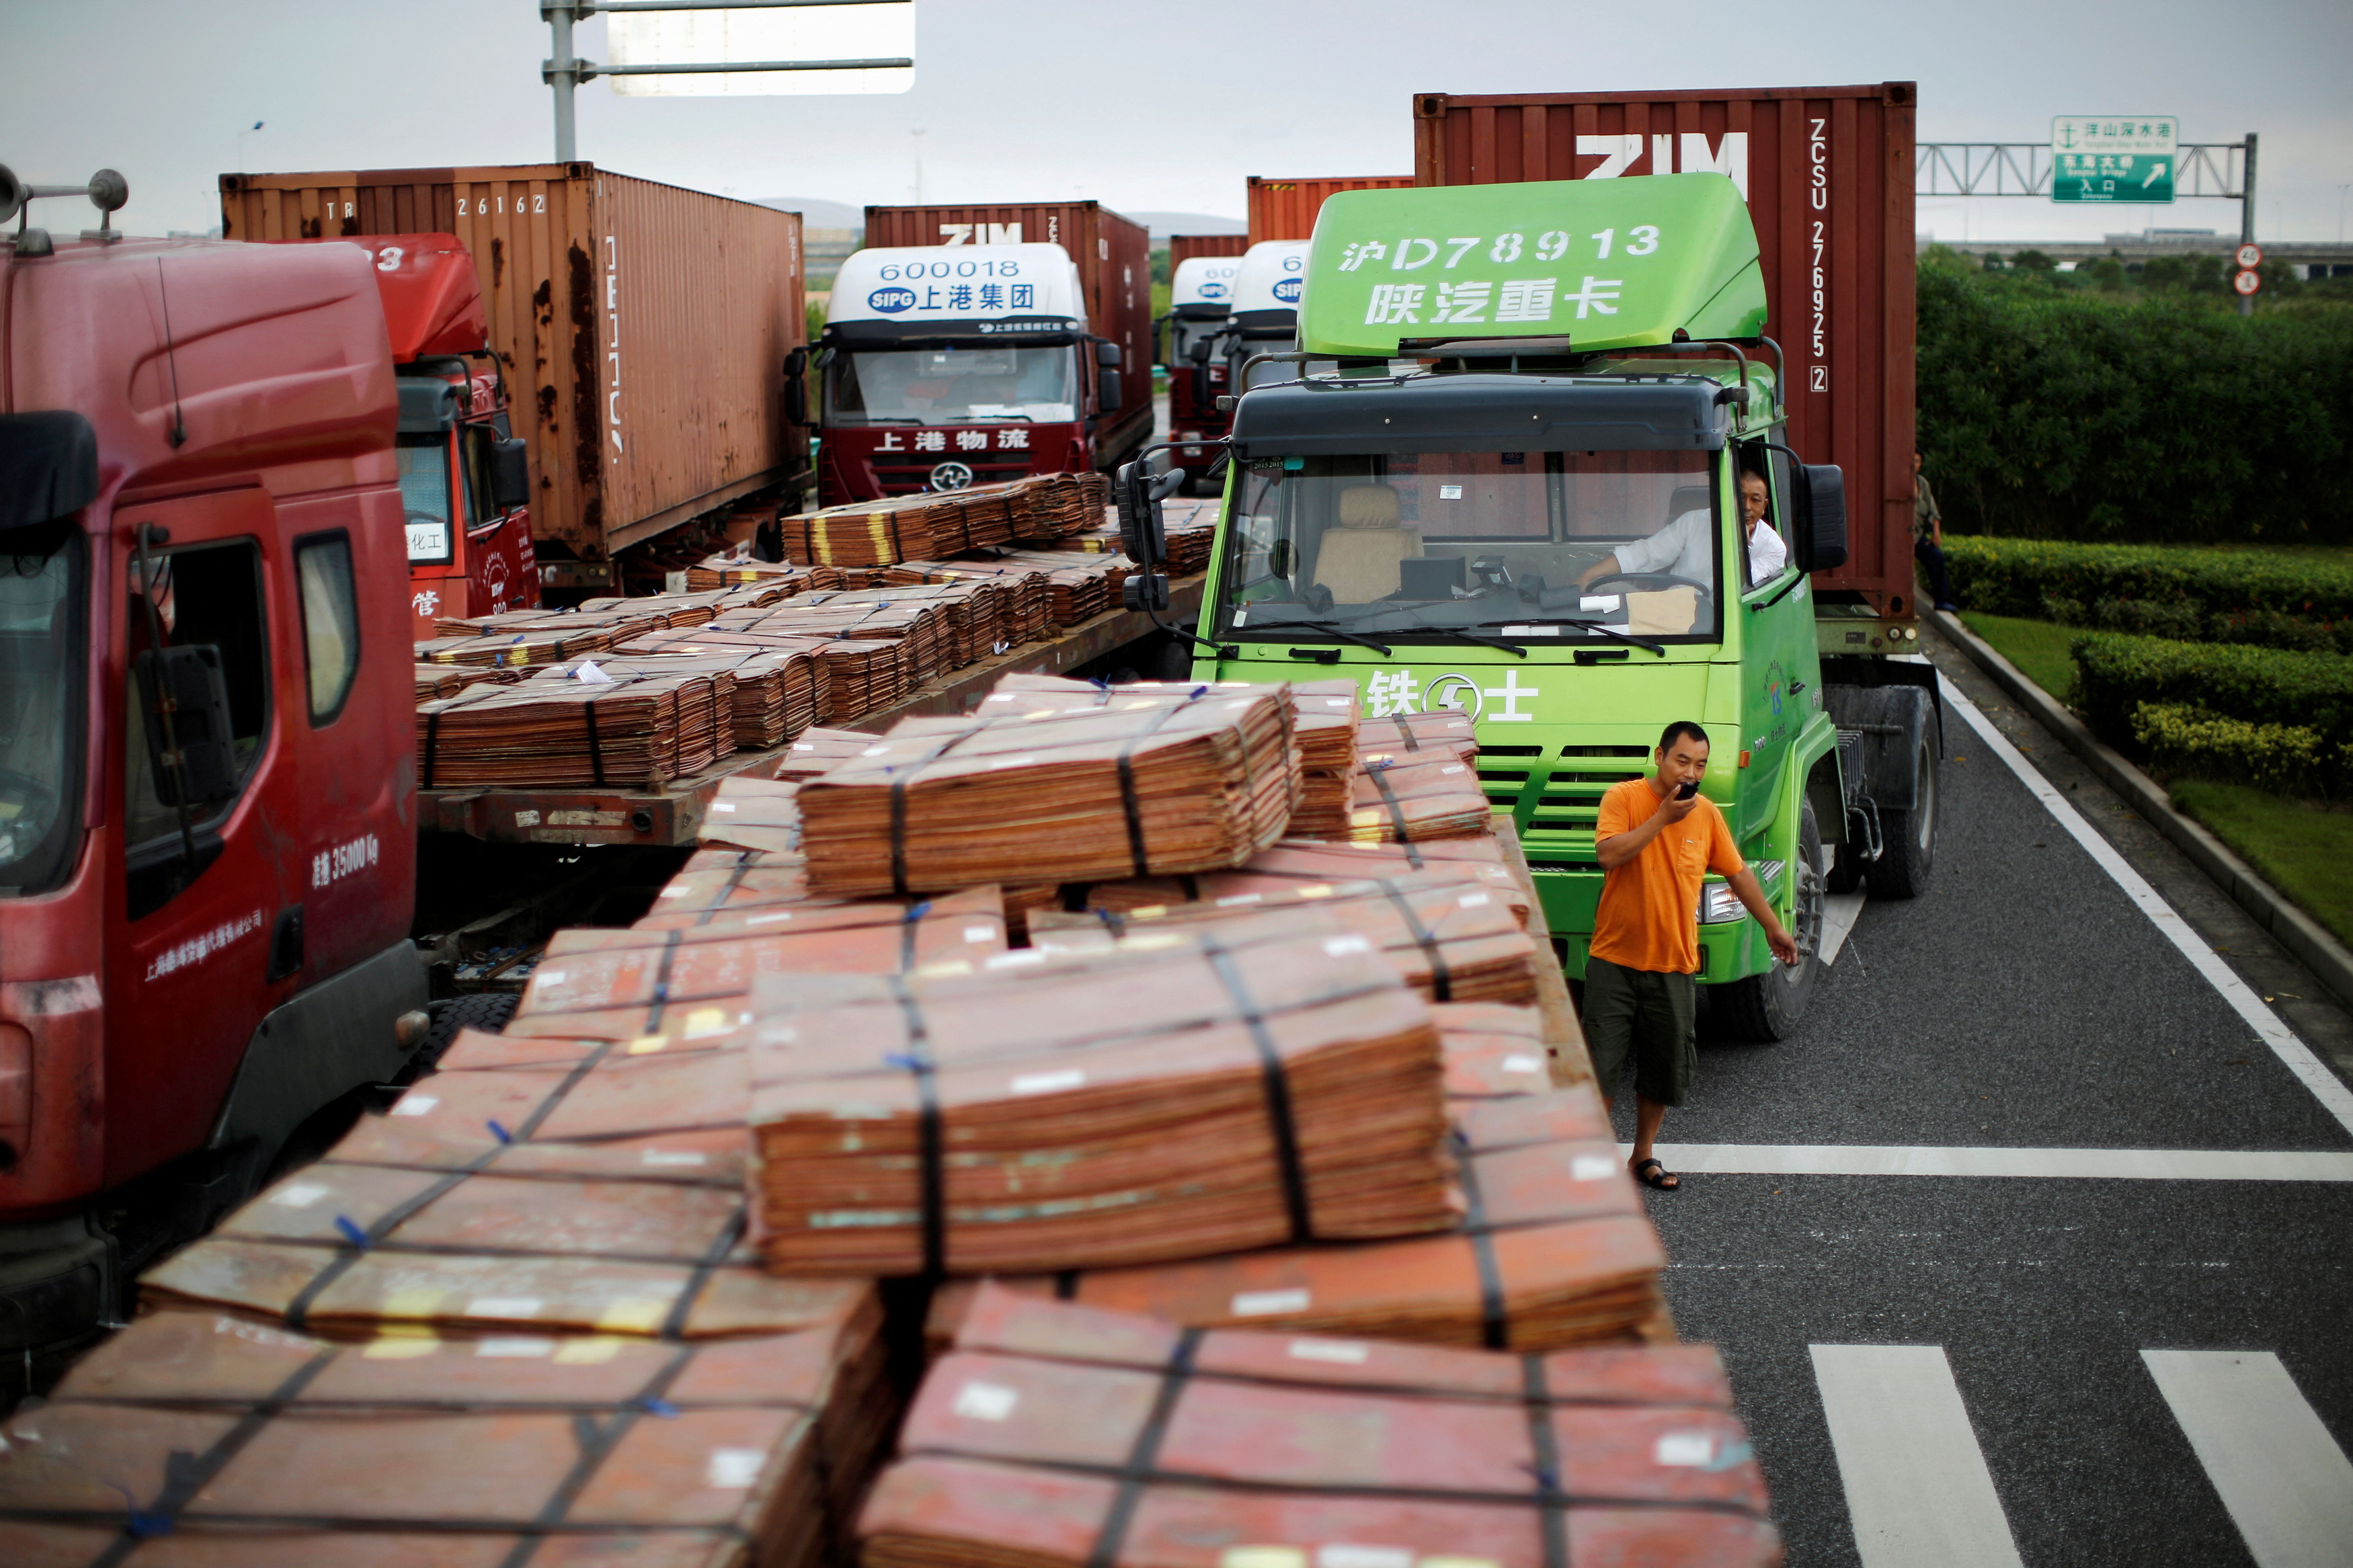 Trucks carrying copper and other goods are seen waiting to enter an area of the Shanghai Free Trade Zone, in Shanghai